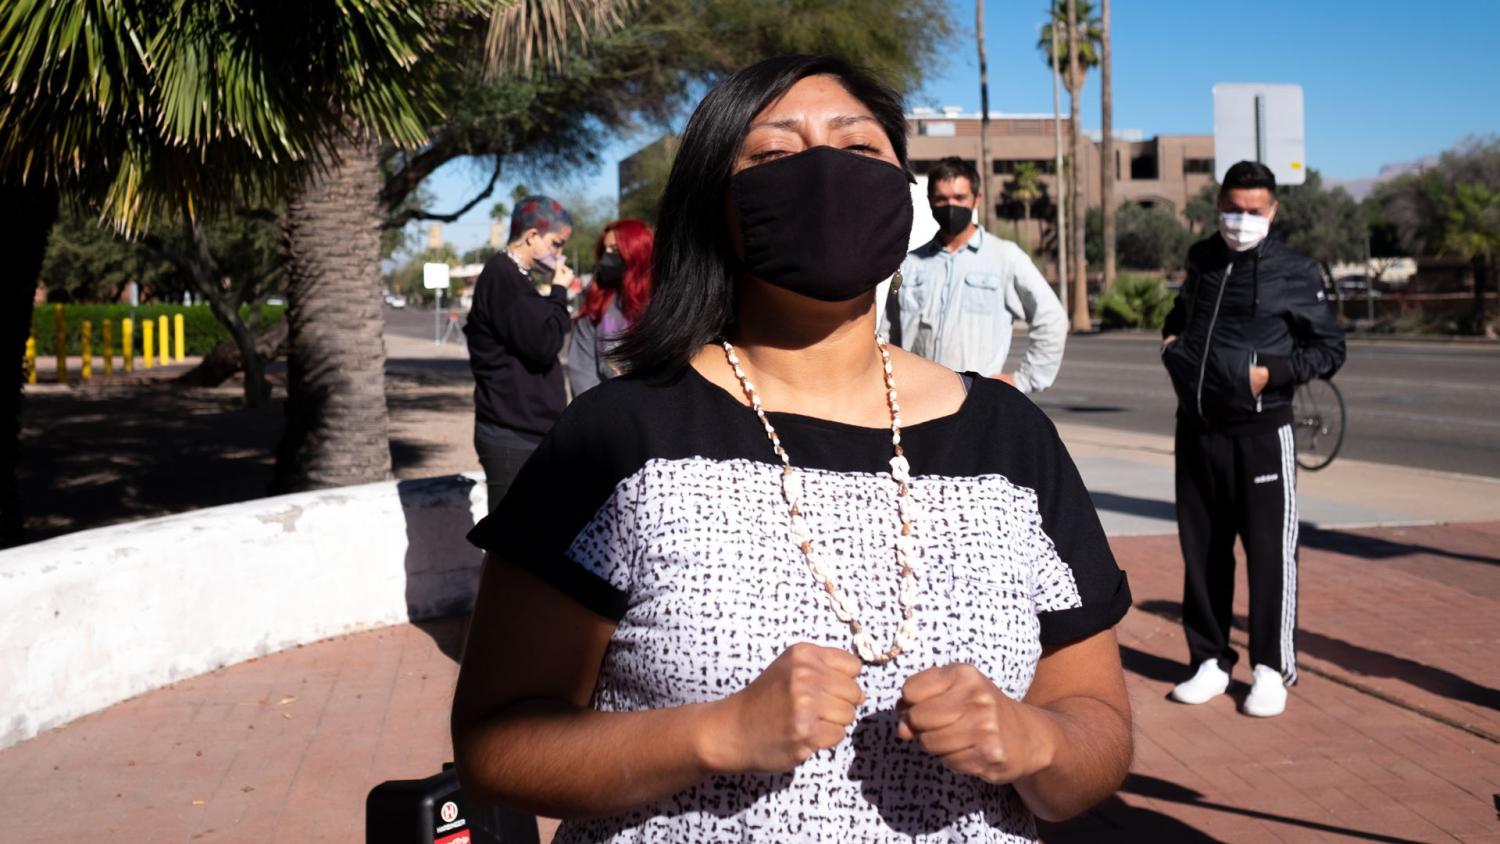 Amber Ortega celebrates her acquittal at a press conference in downtown Tucson on Jan. 21, 2022.